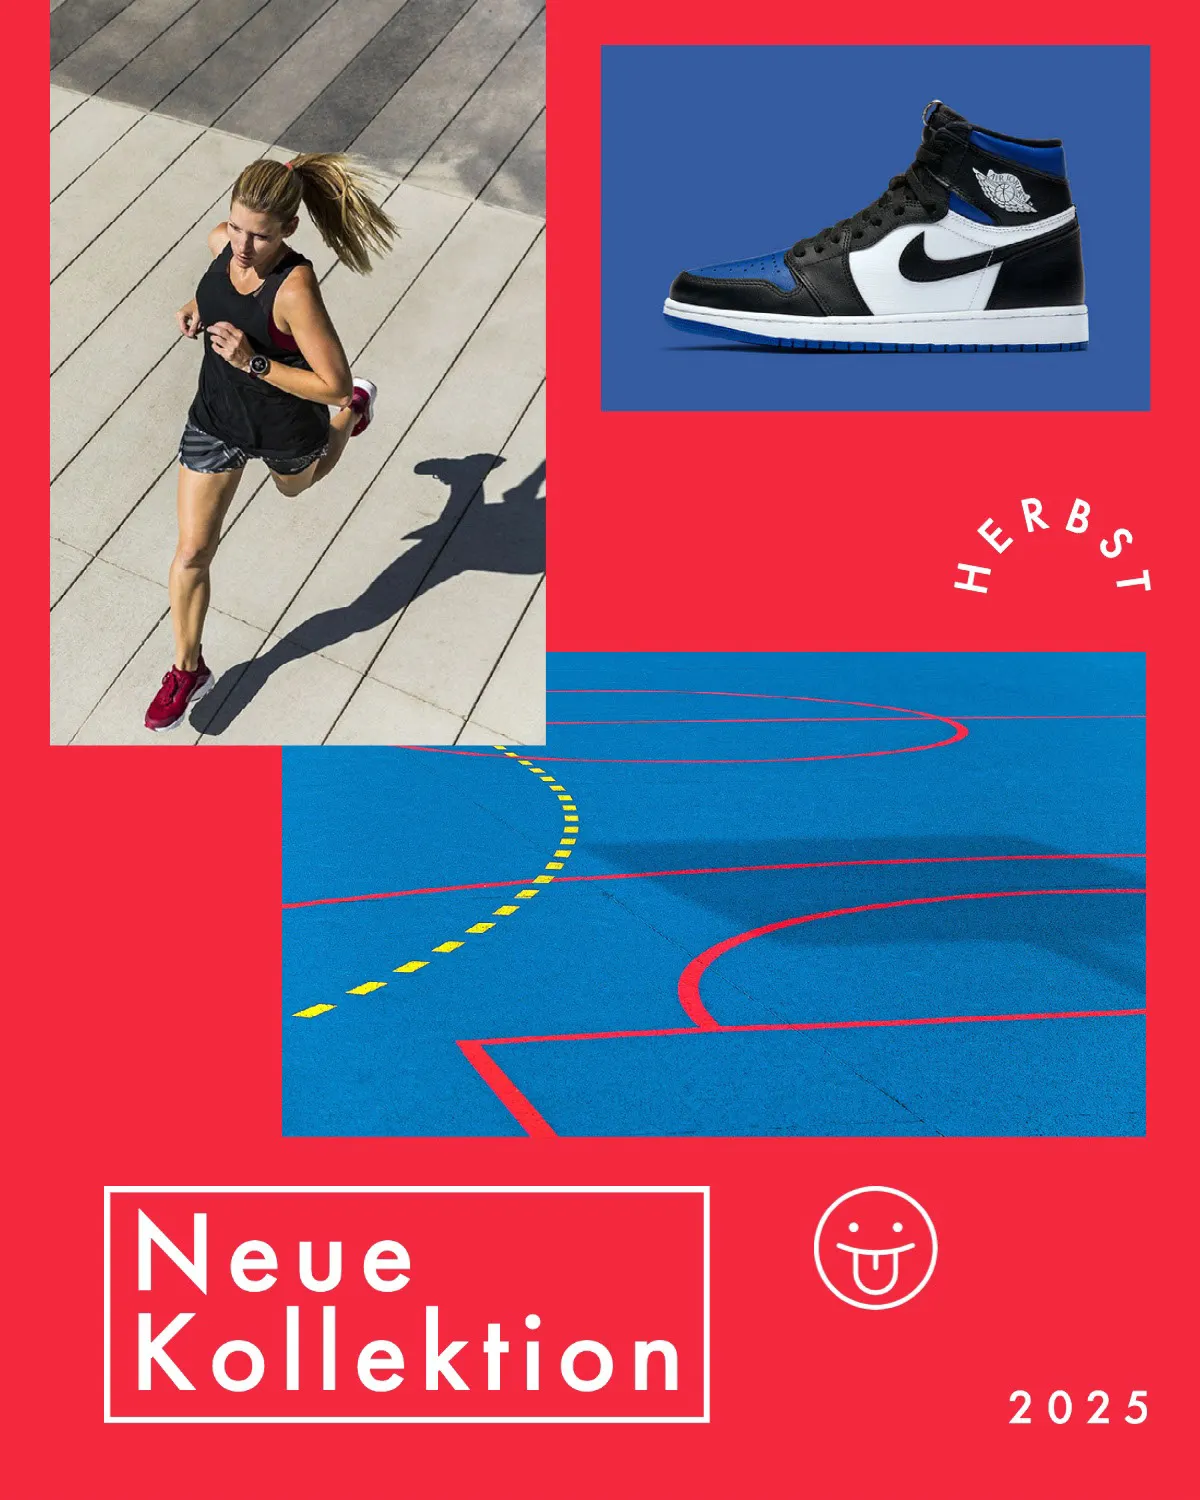 Red and blue Modern Sports Fashion Instagram Feed Ad